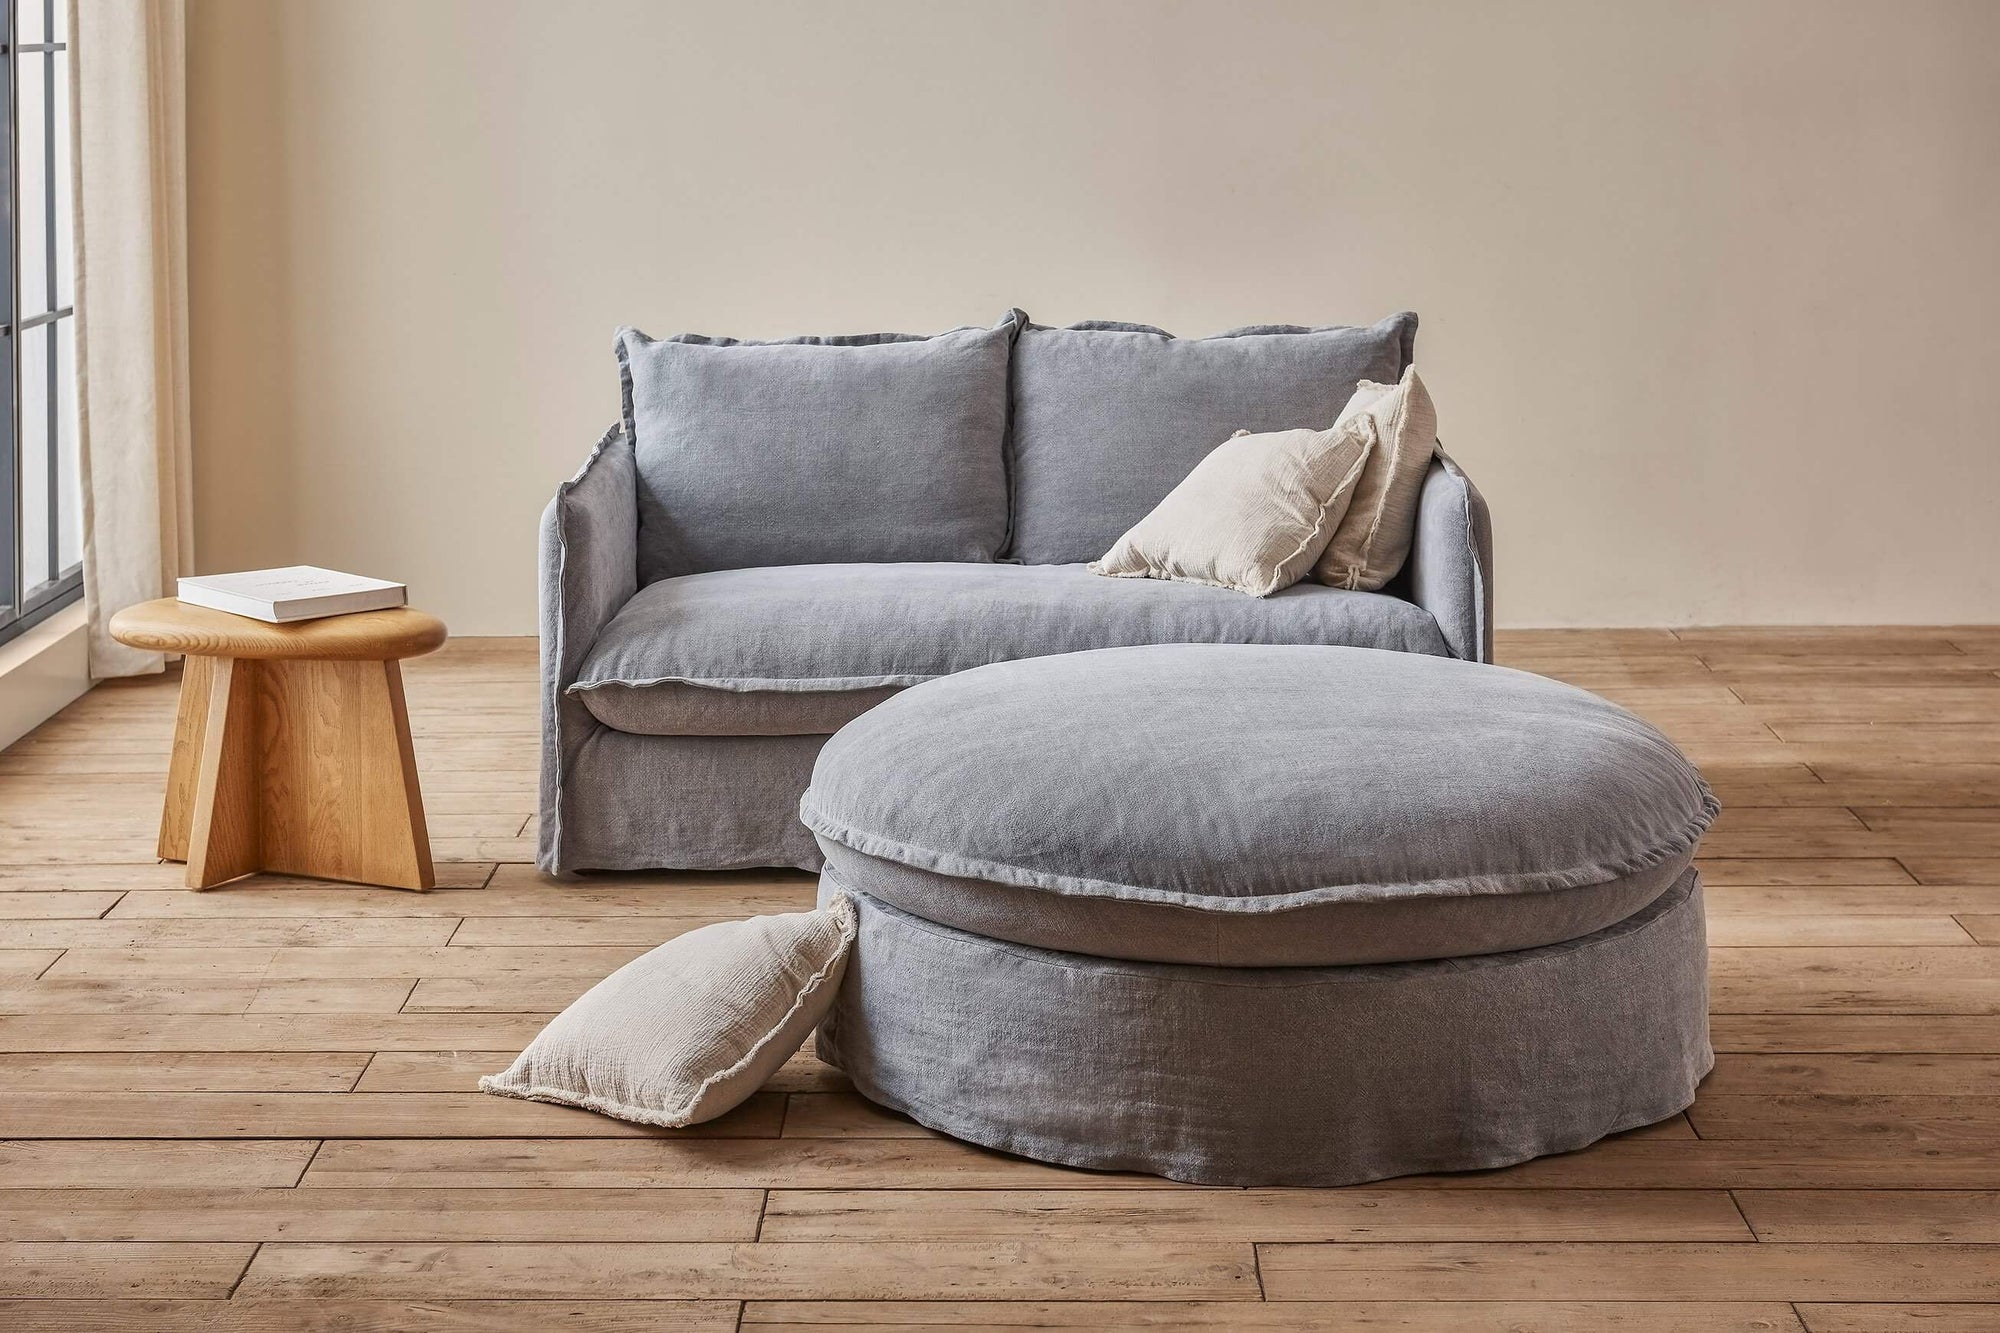 Neva Round Ottoman in Ink Cap, a medium cool grey Light Weight Linen, placed in a room with the Neva Loveseat Sofa in the background